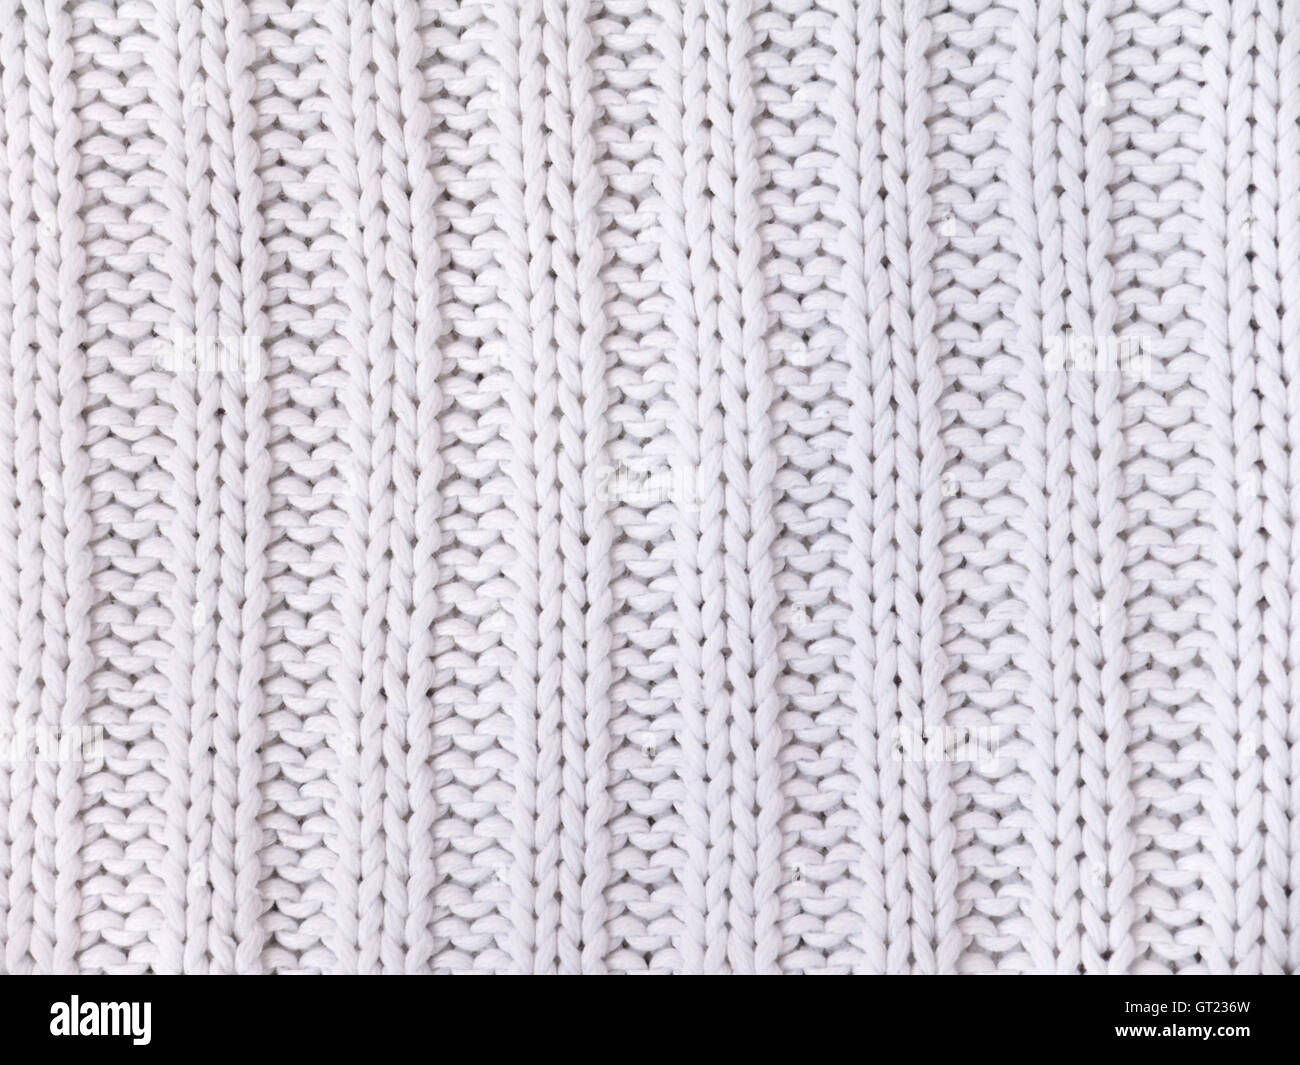 White knitted cotton fabric for cold weather Stock Photo